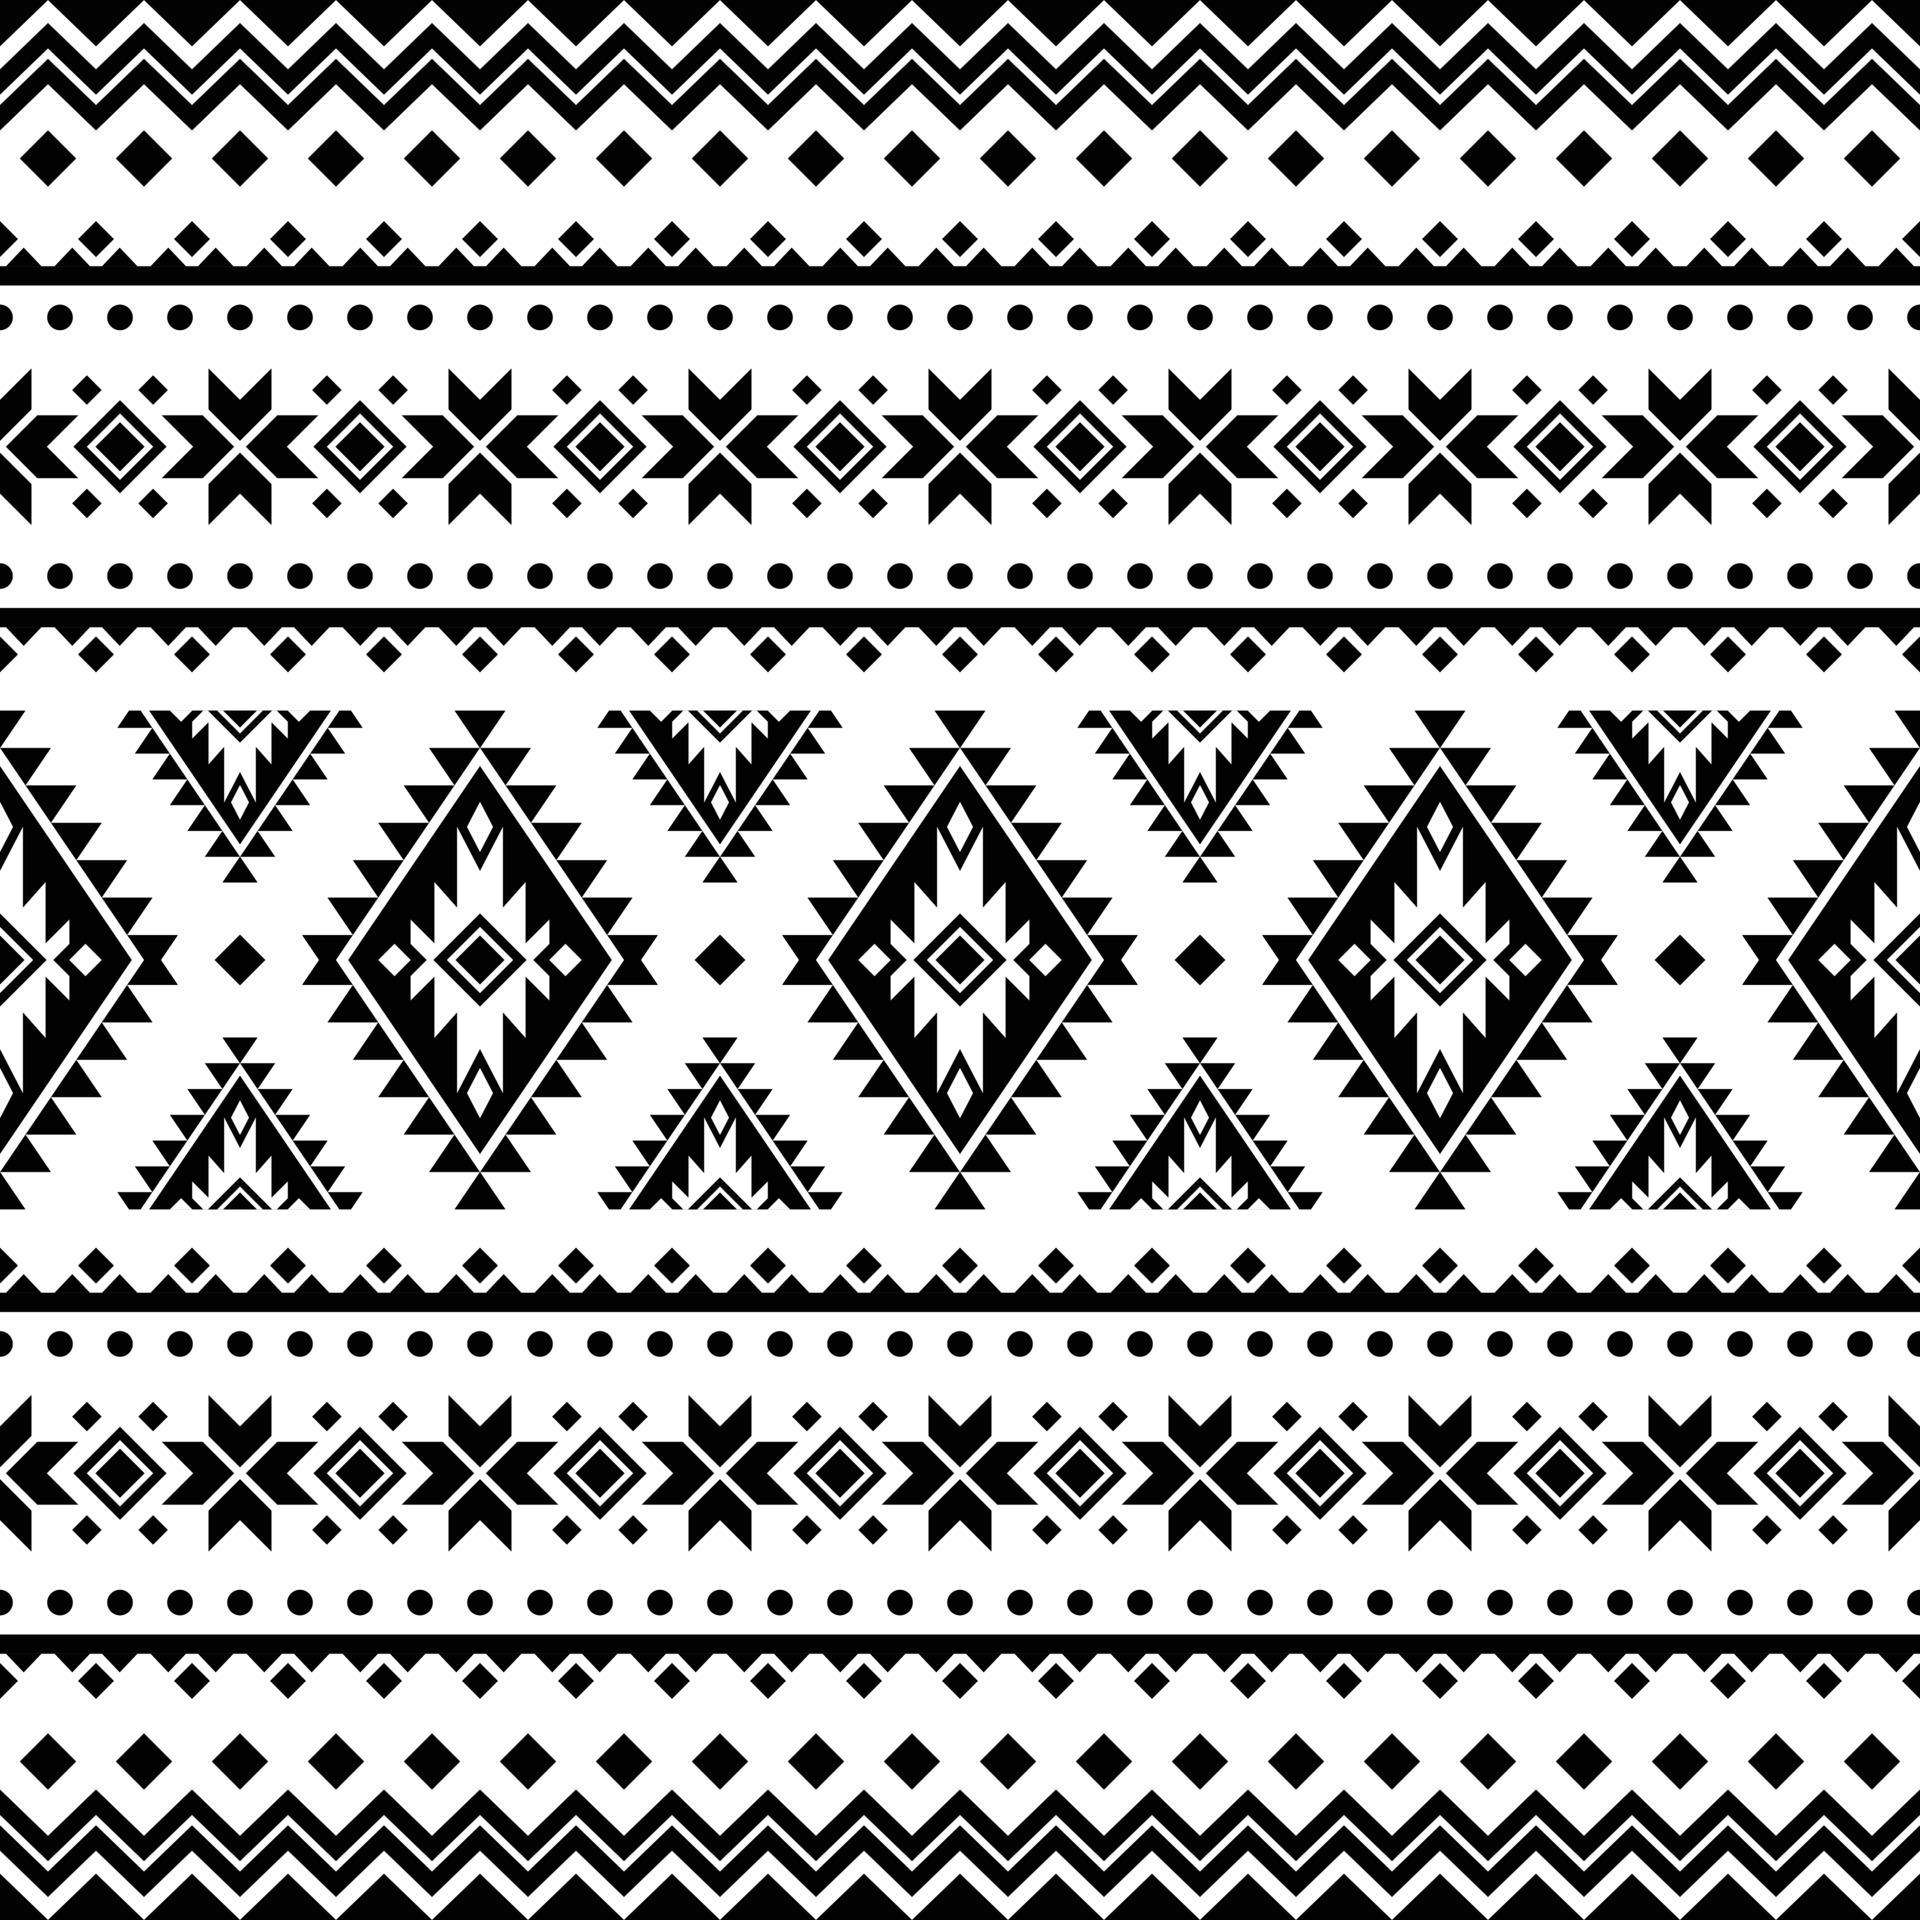 Native design in geometric pattern. Seamless ethnic pattern. Style of ...